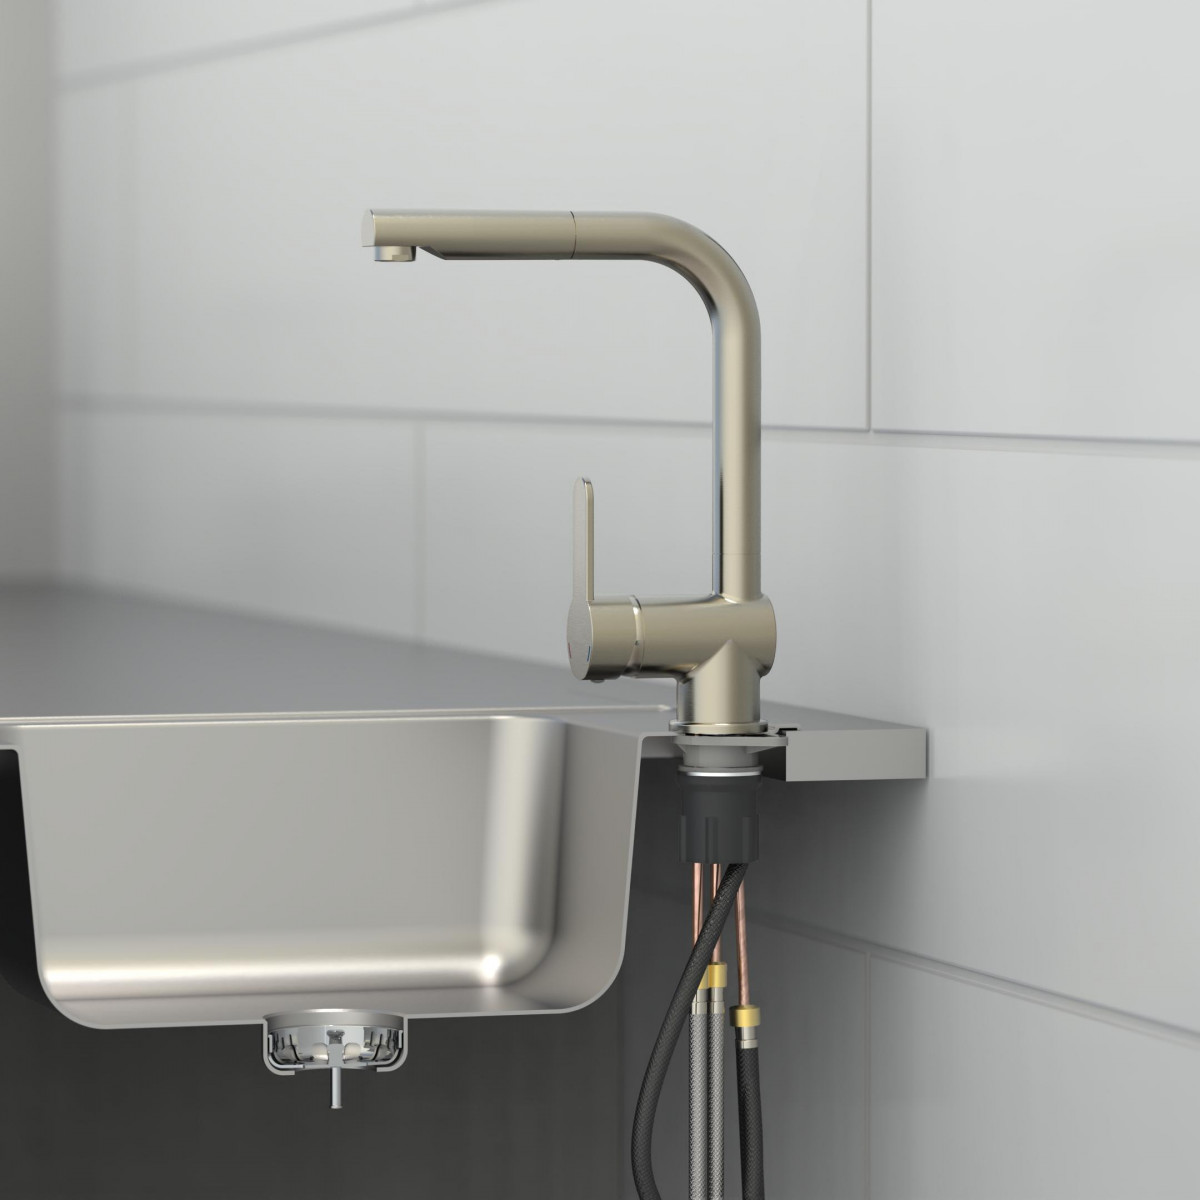 LONDON Sink mixer, stainless steel look, with pull-out spout